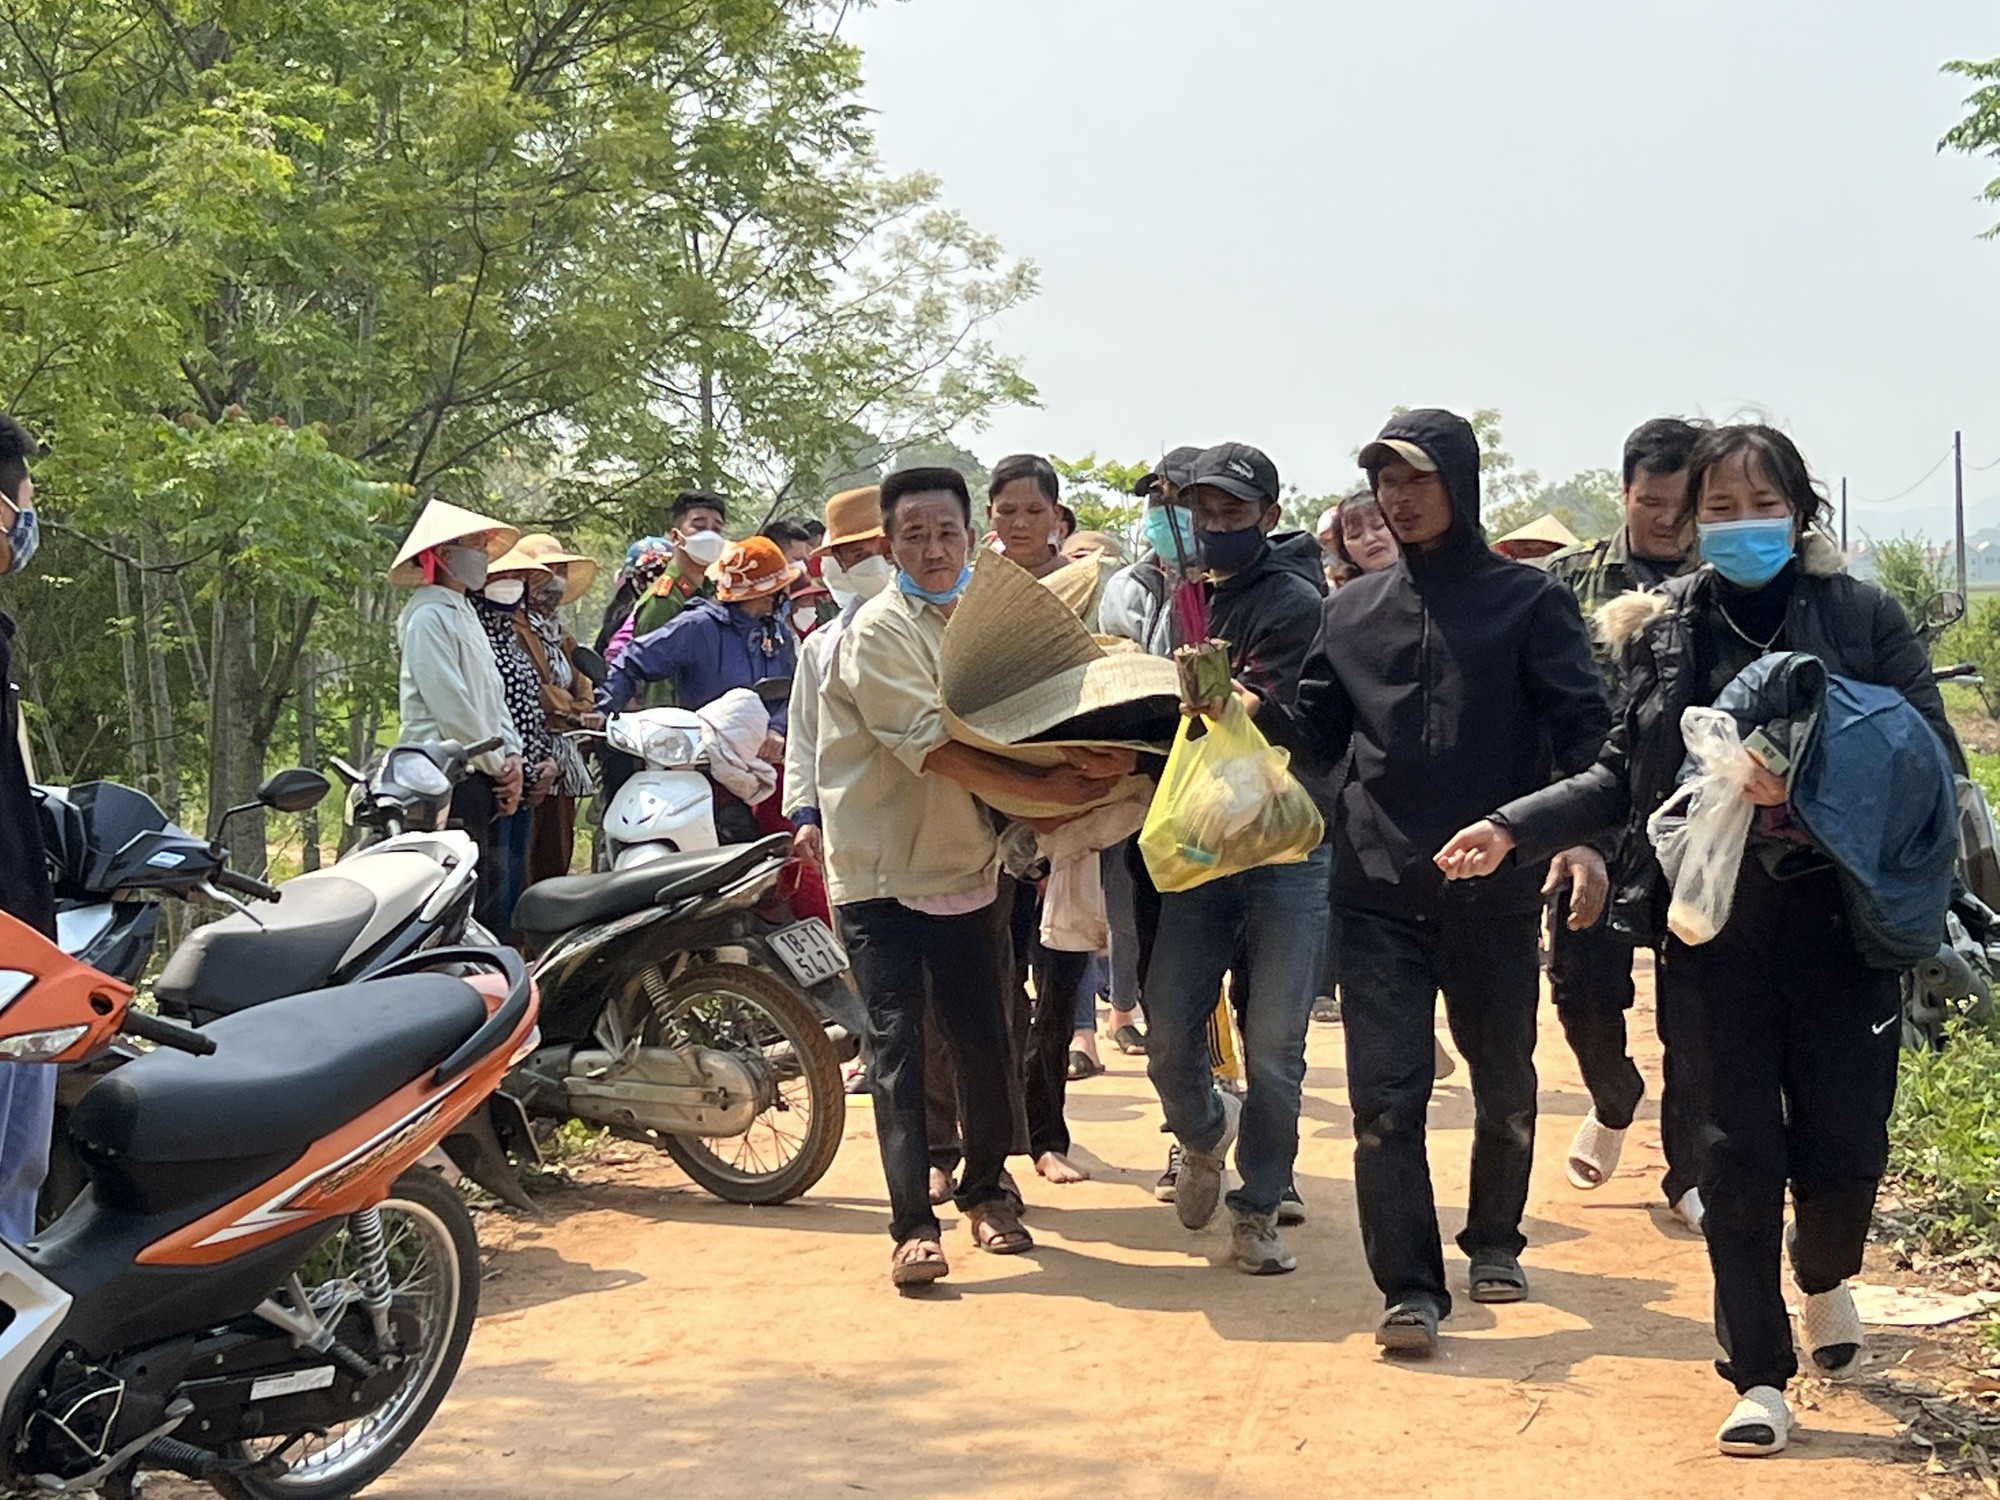 6th grader drowning case in Thanh Hoa: All 5 bodies found - 1